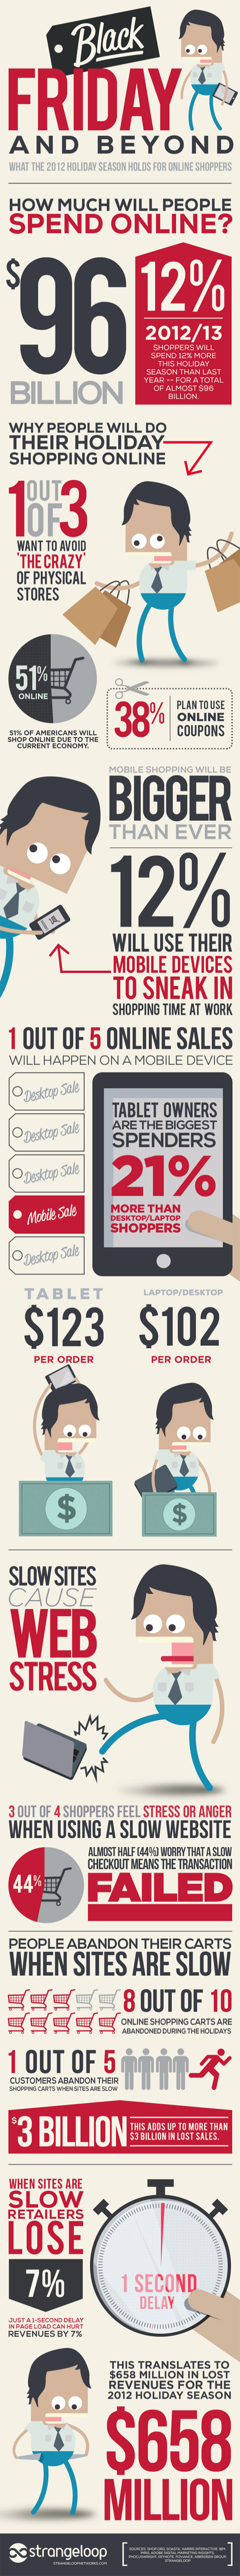 black friday and beyond infographic